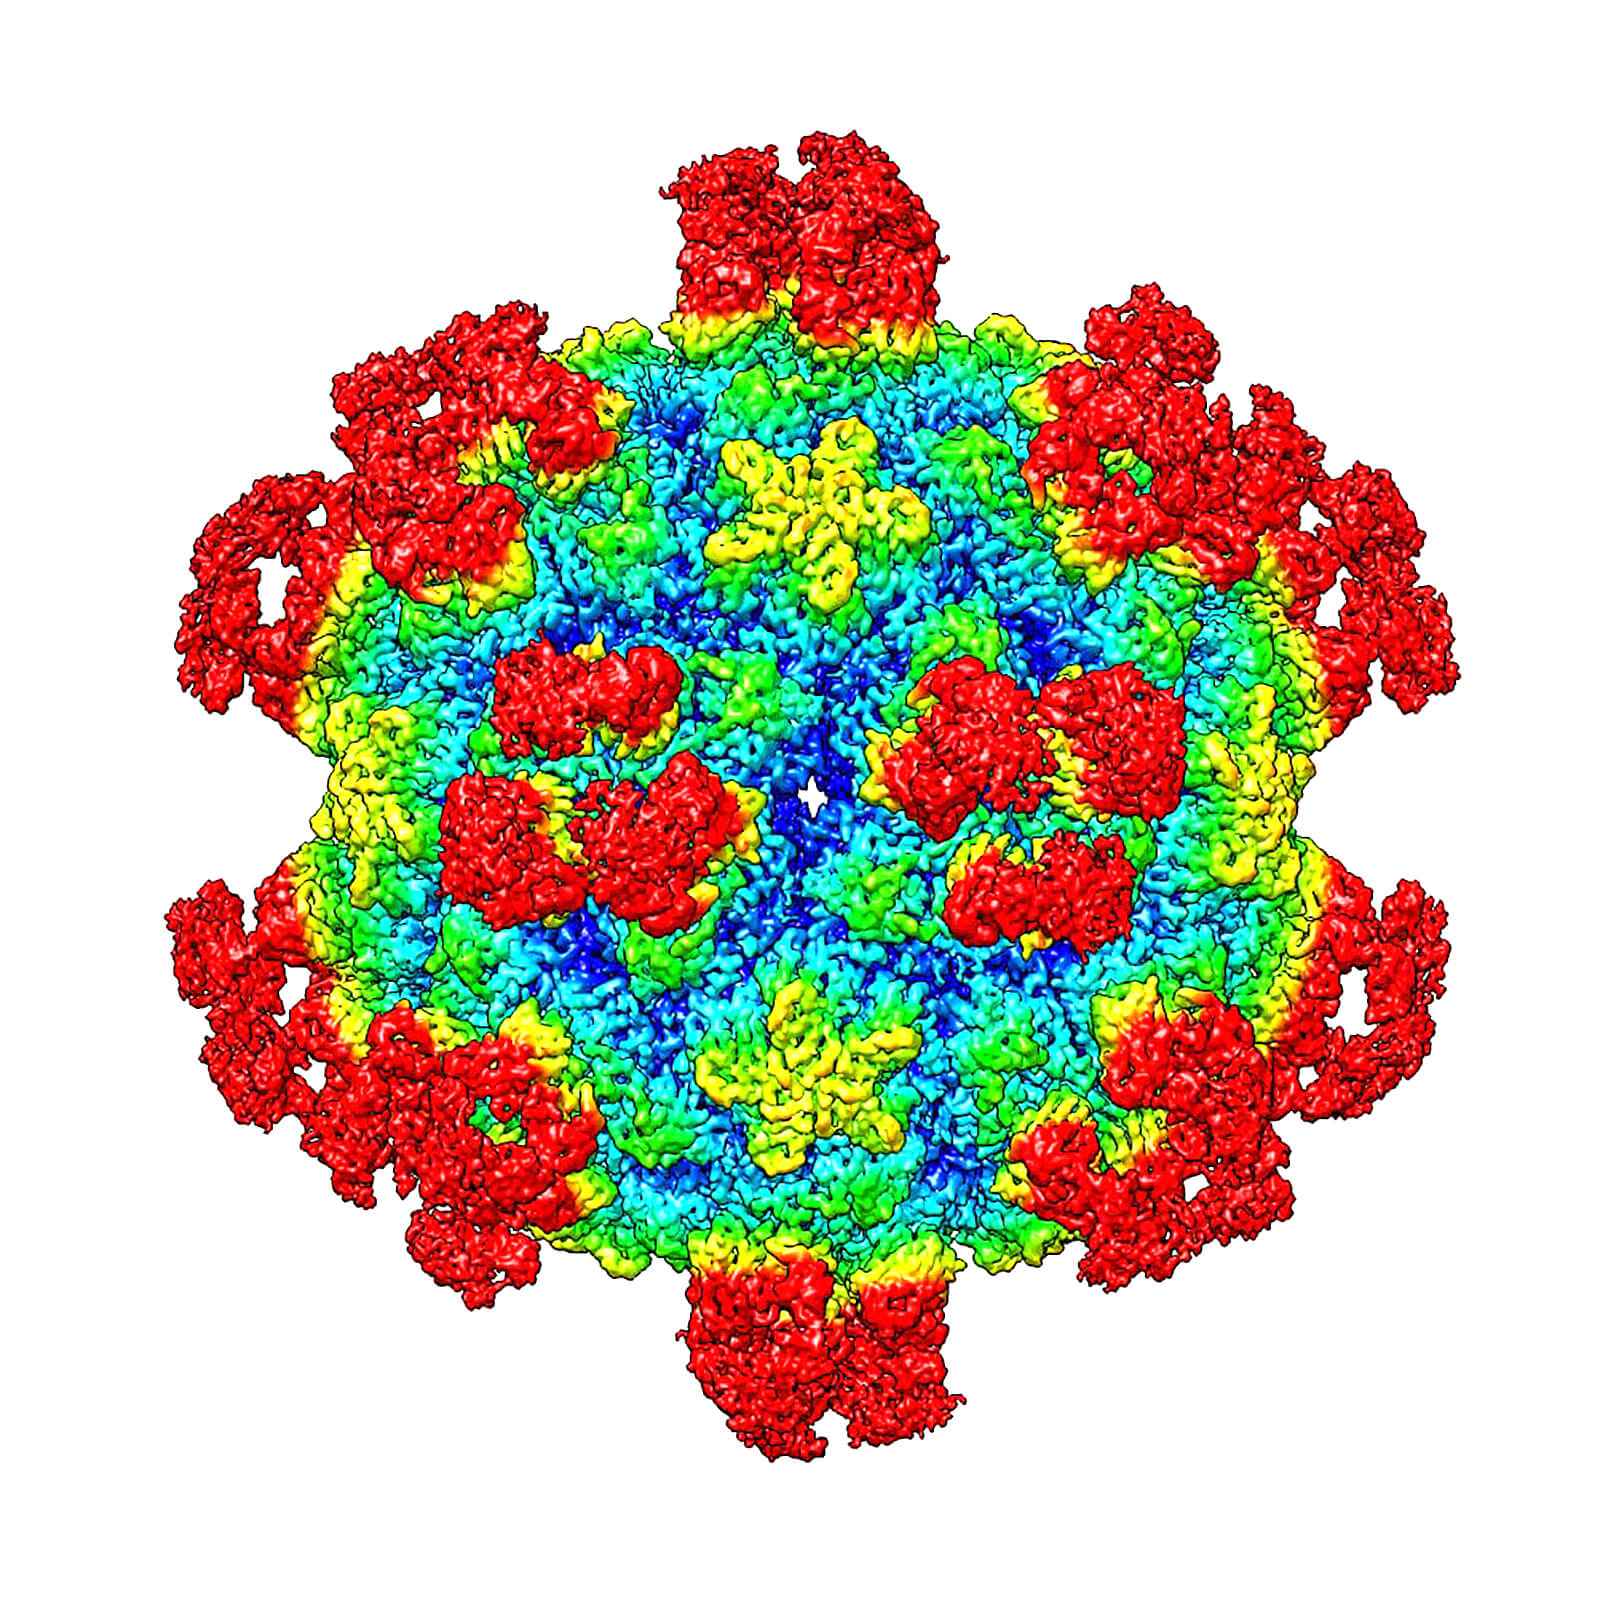 New mechanism to destroy viruses could lead to future therapies - Purdue University News